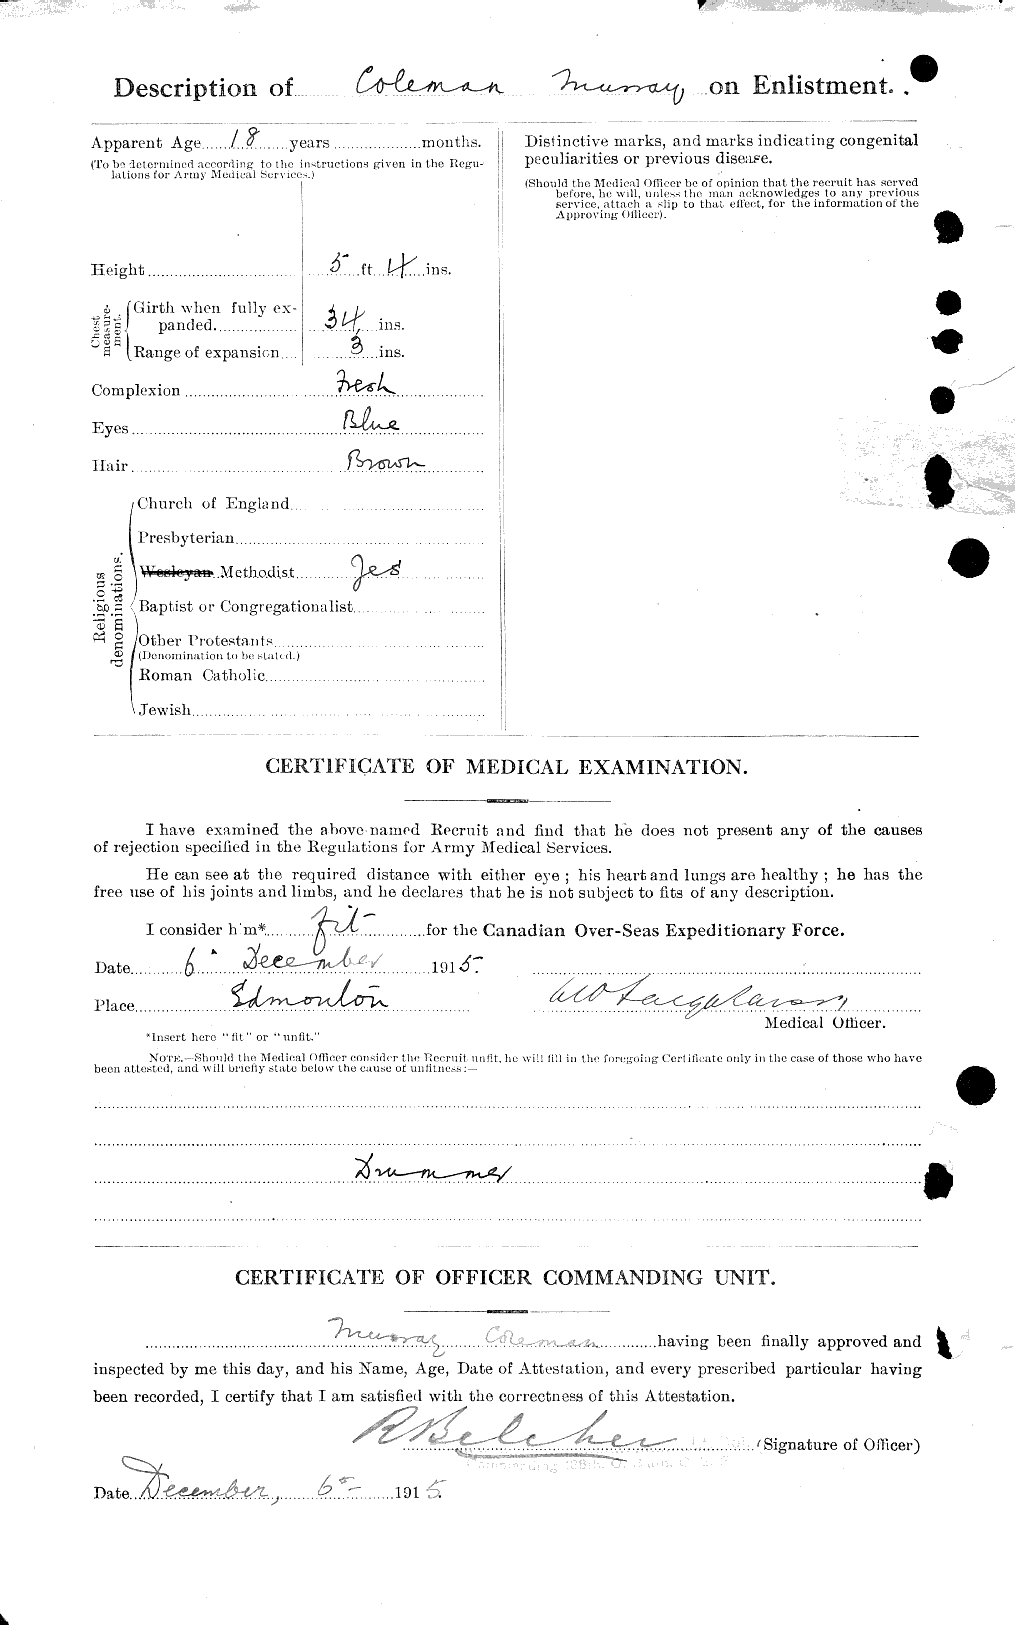 Personnel Records of the First World War - CEF 028243b